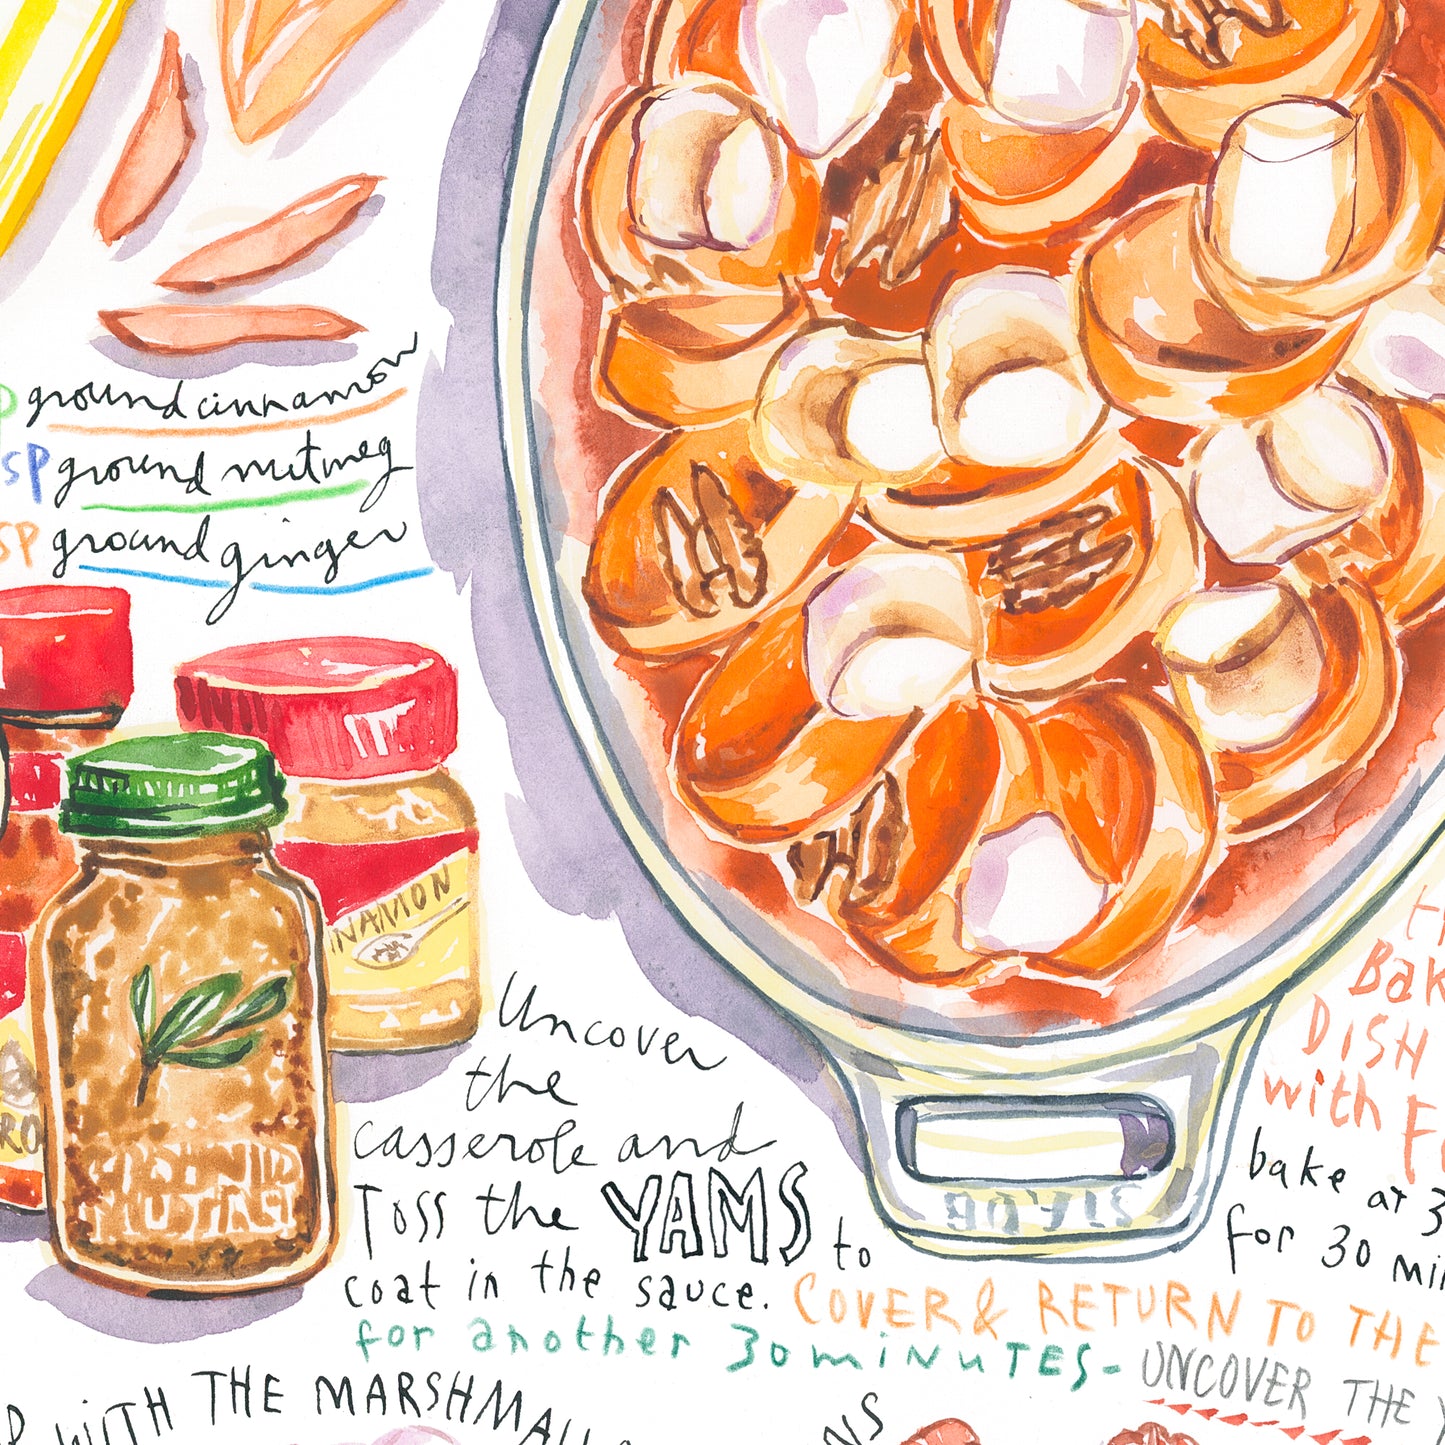 Candied Yams recipe. Original watercolor painting